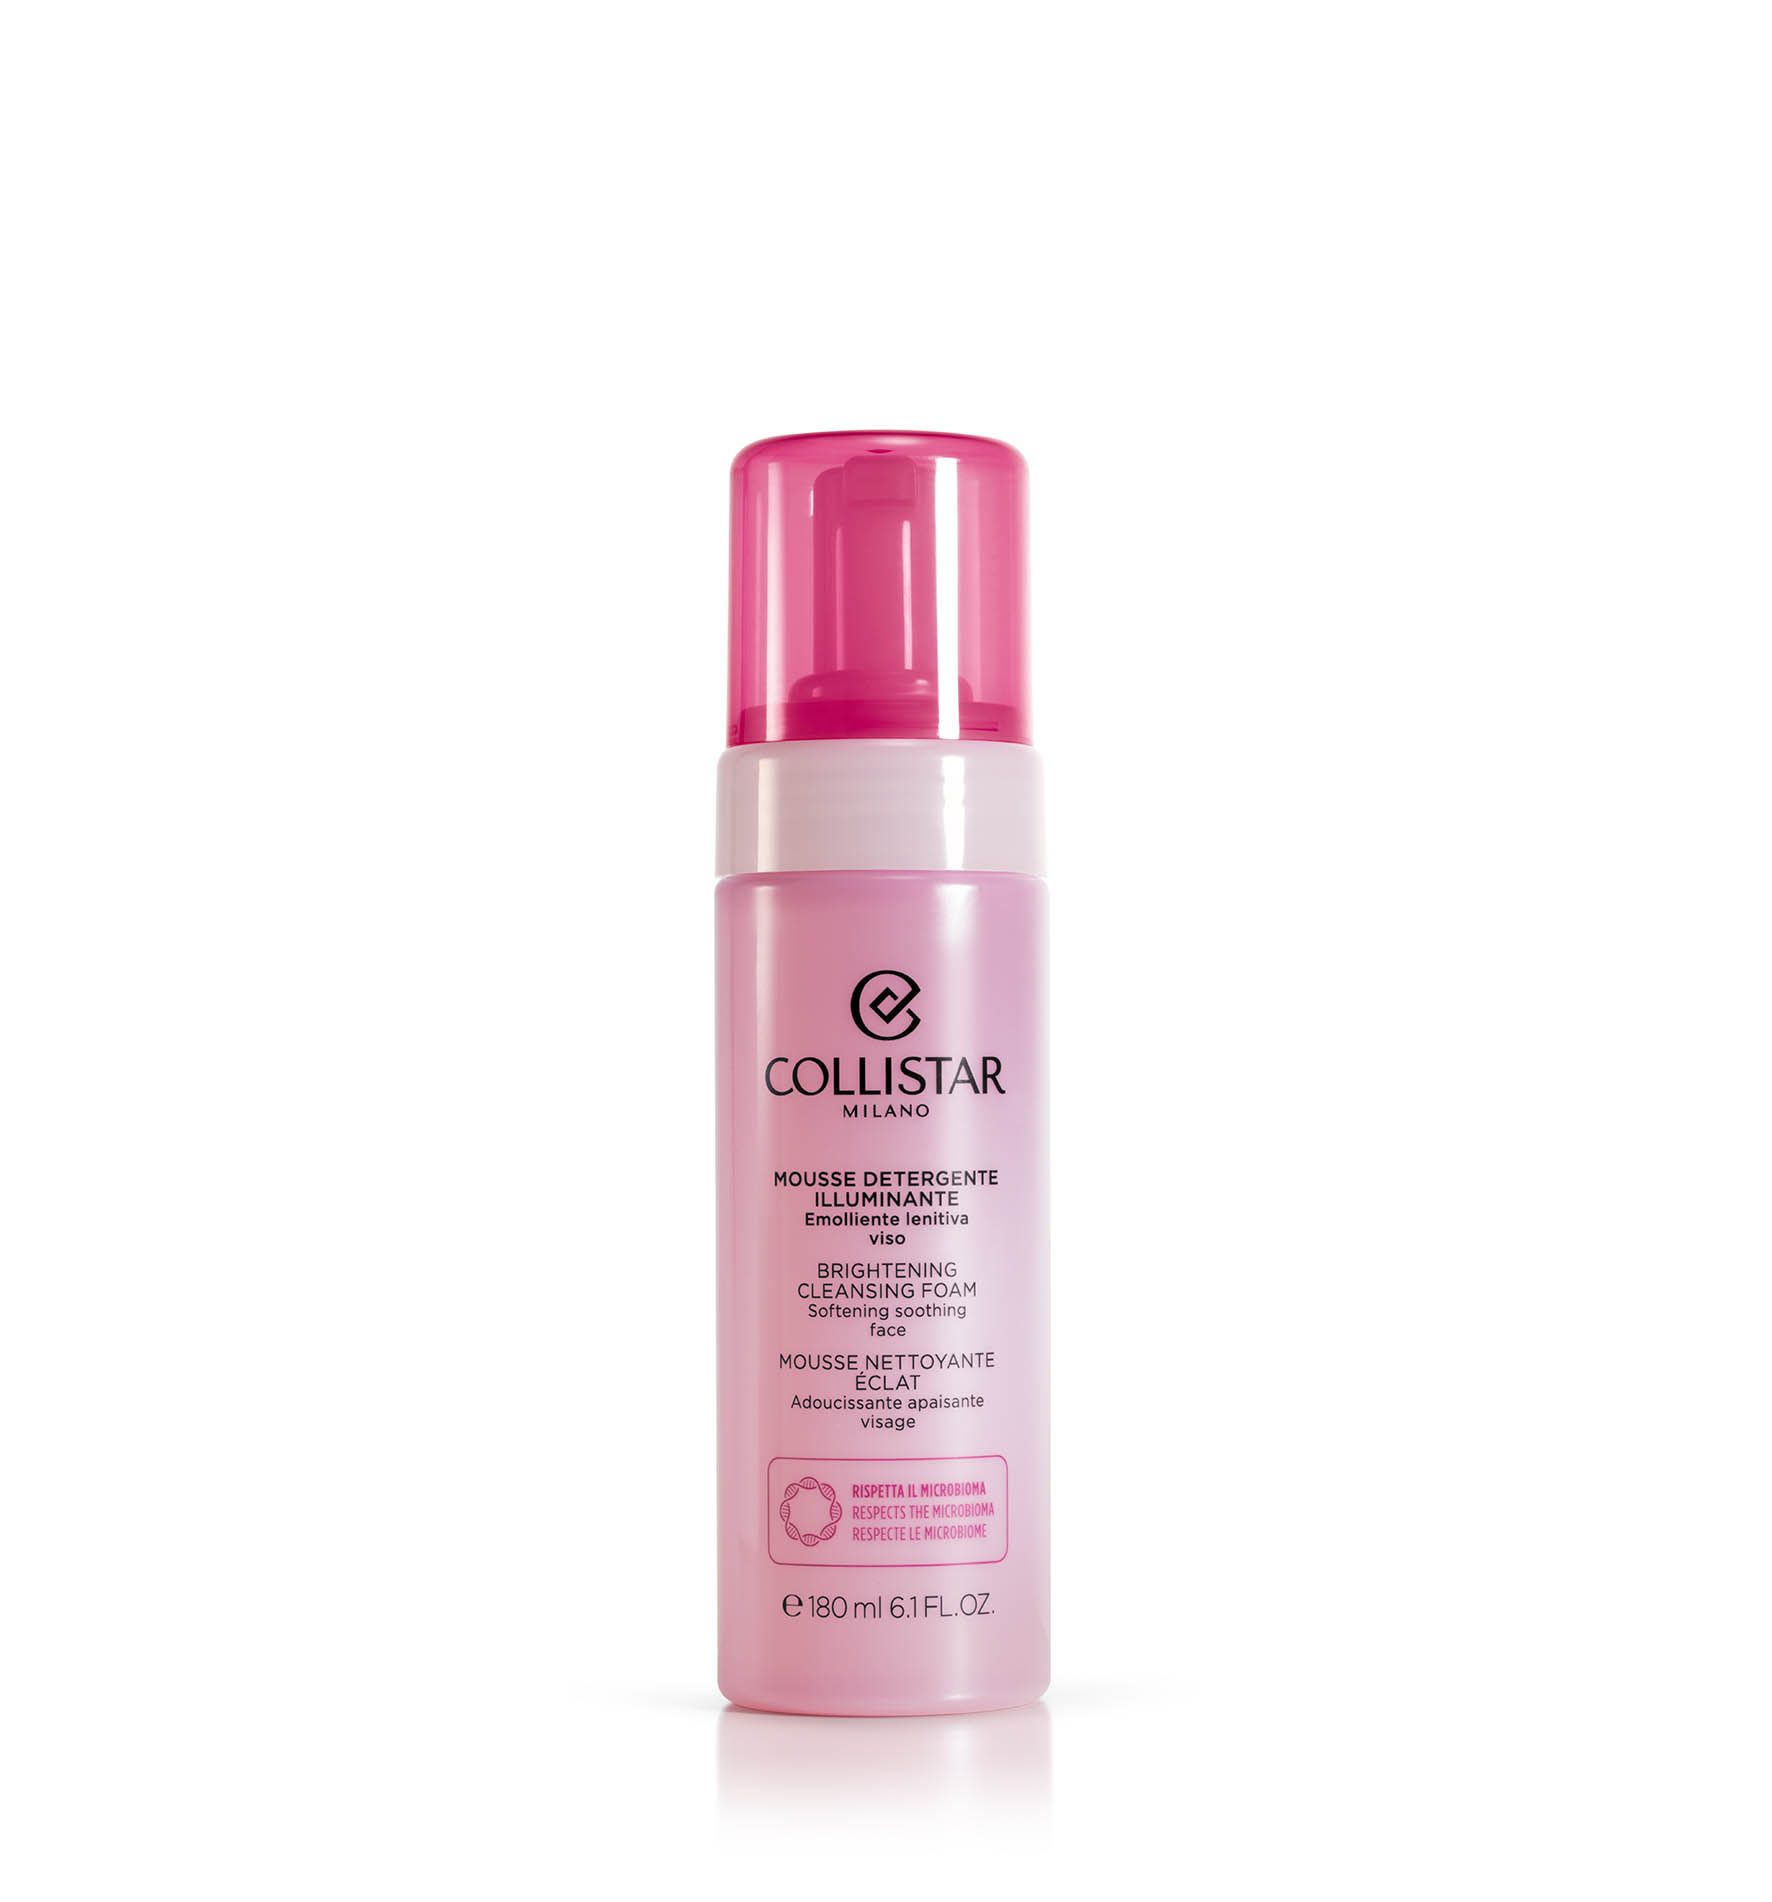 BRIGHTENING CLEANSING FOAM - Cleansers | Collistar - Shop Online Ufficiale